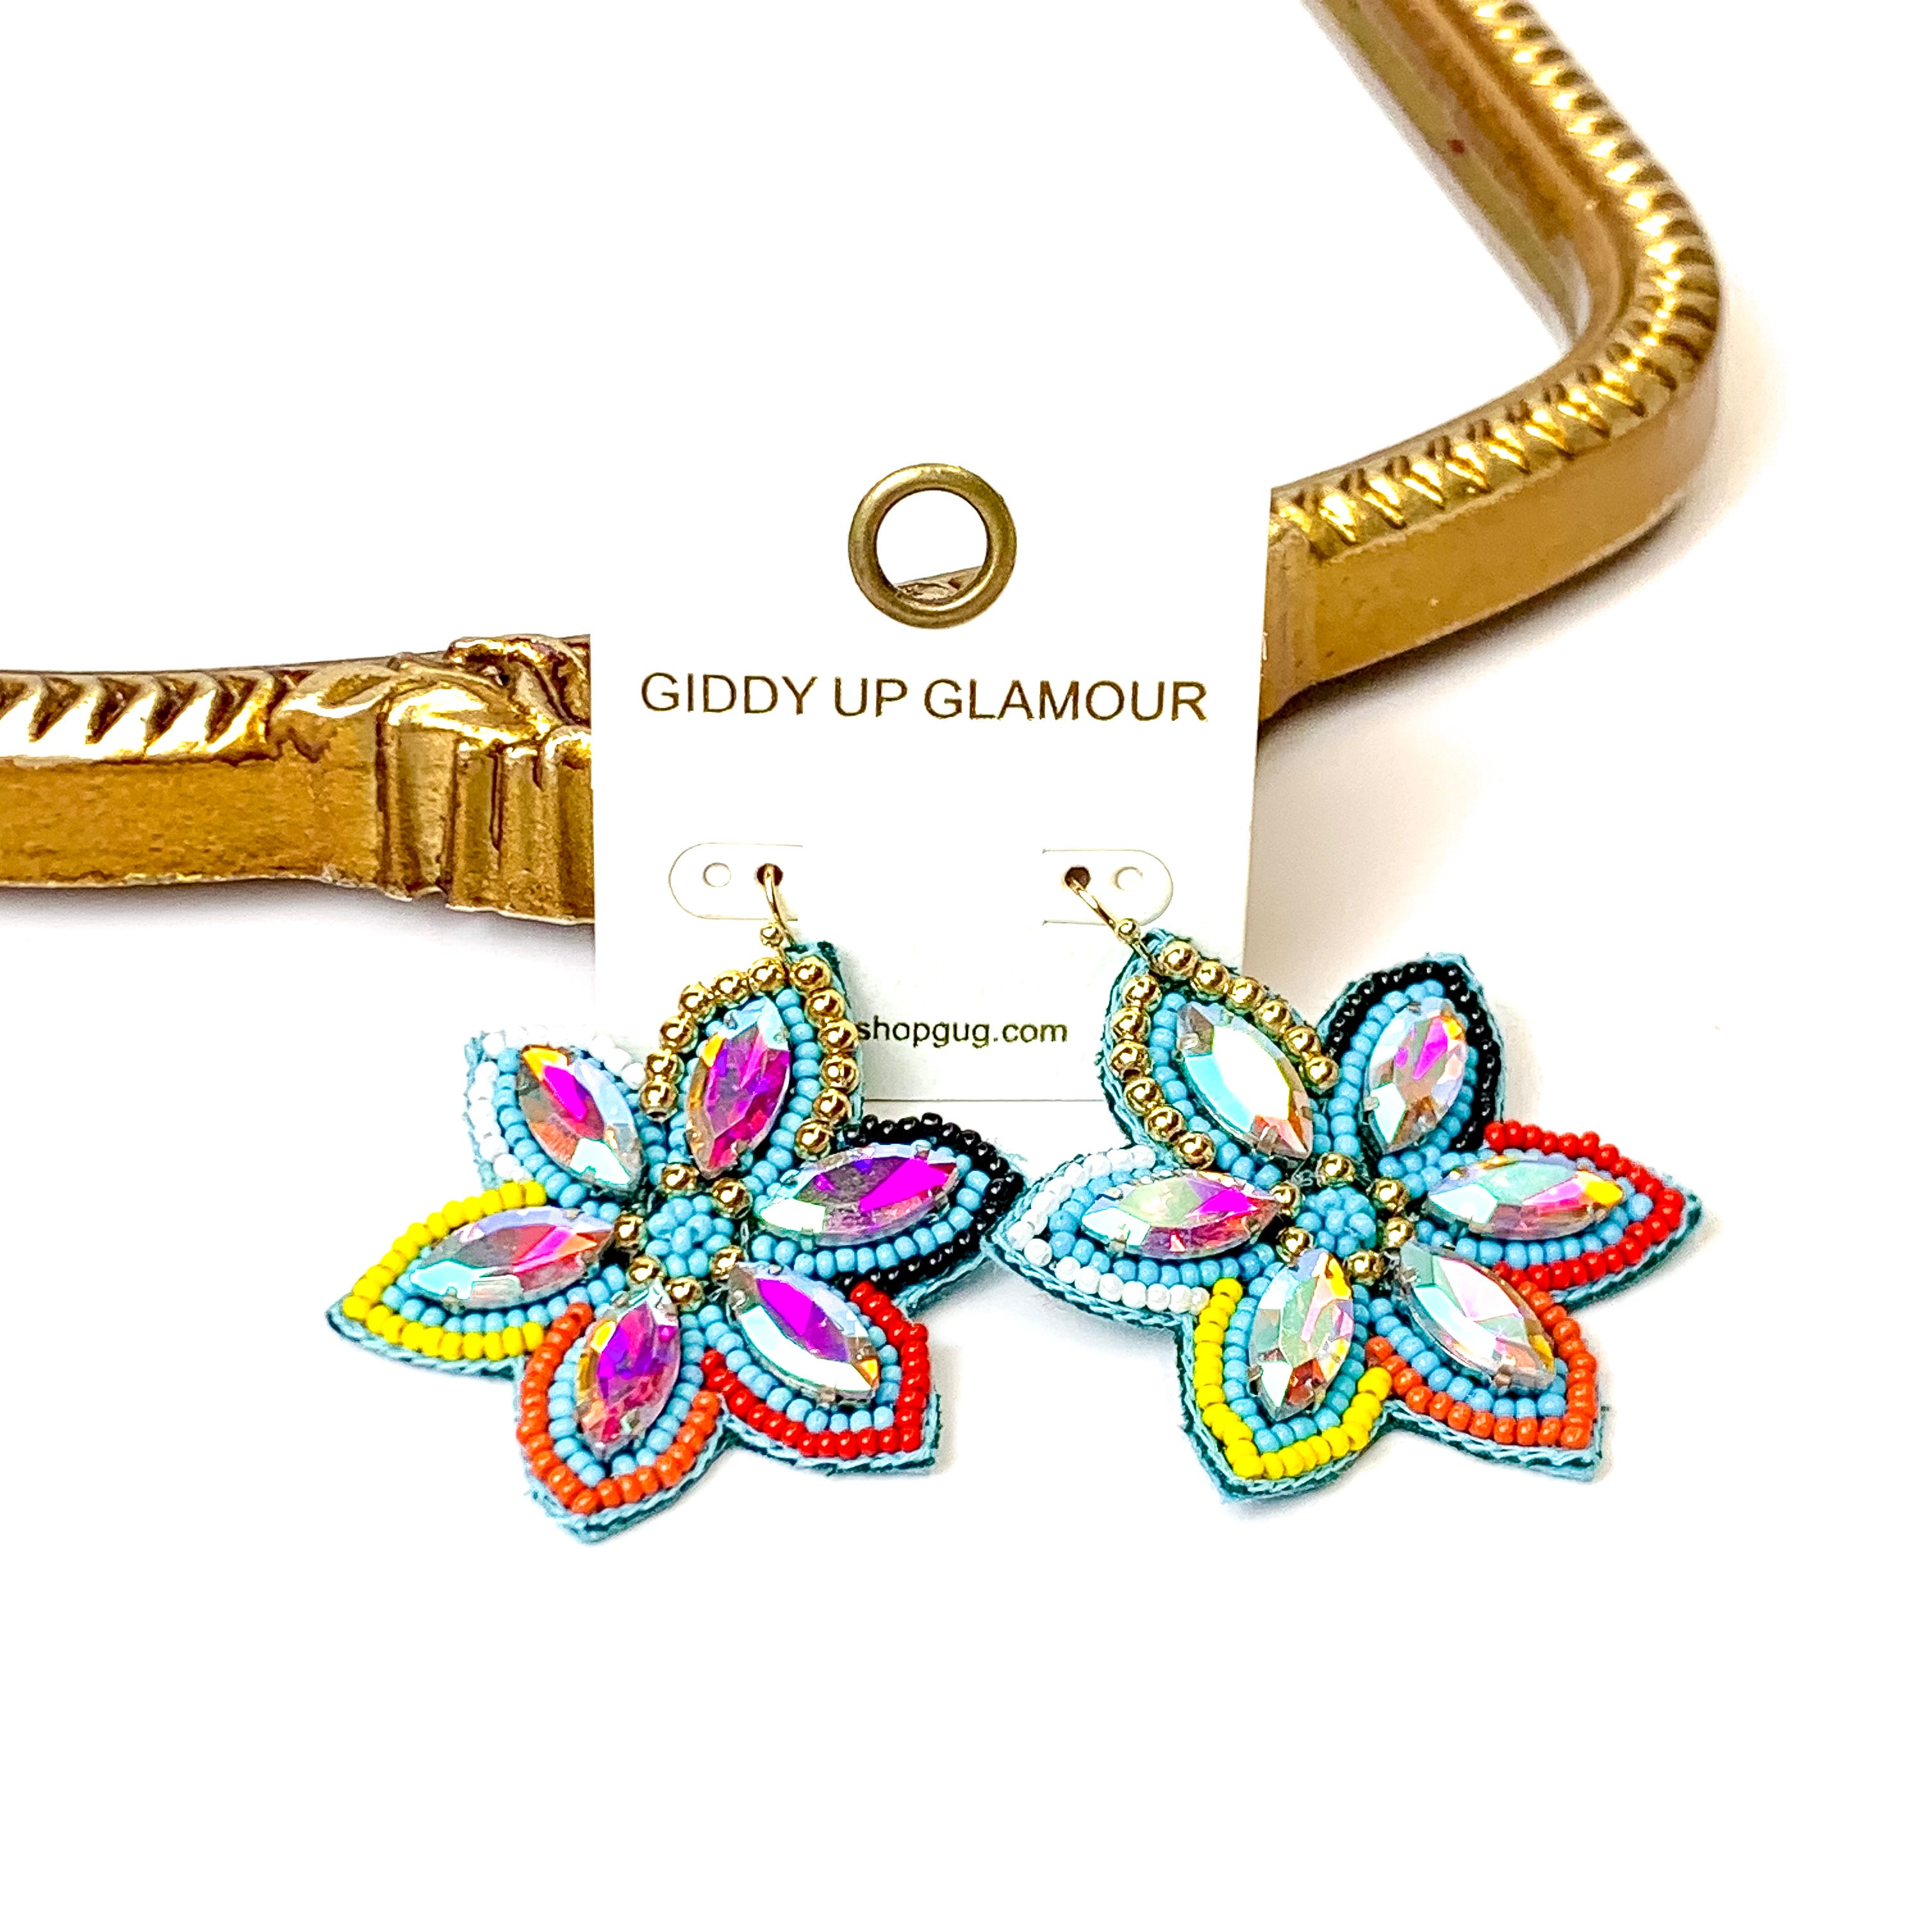 Desert Daisy Multicolored Flower Shaped Earrings with AB Crystal Accents in Turquoise Blue - Giddy Up Glamour Boutique